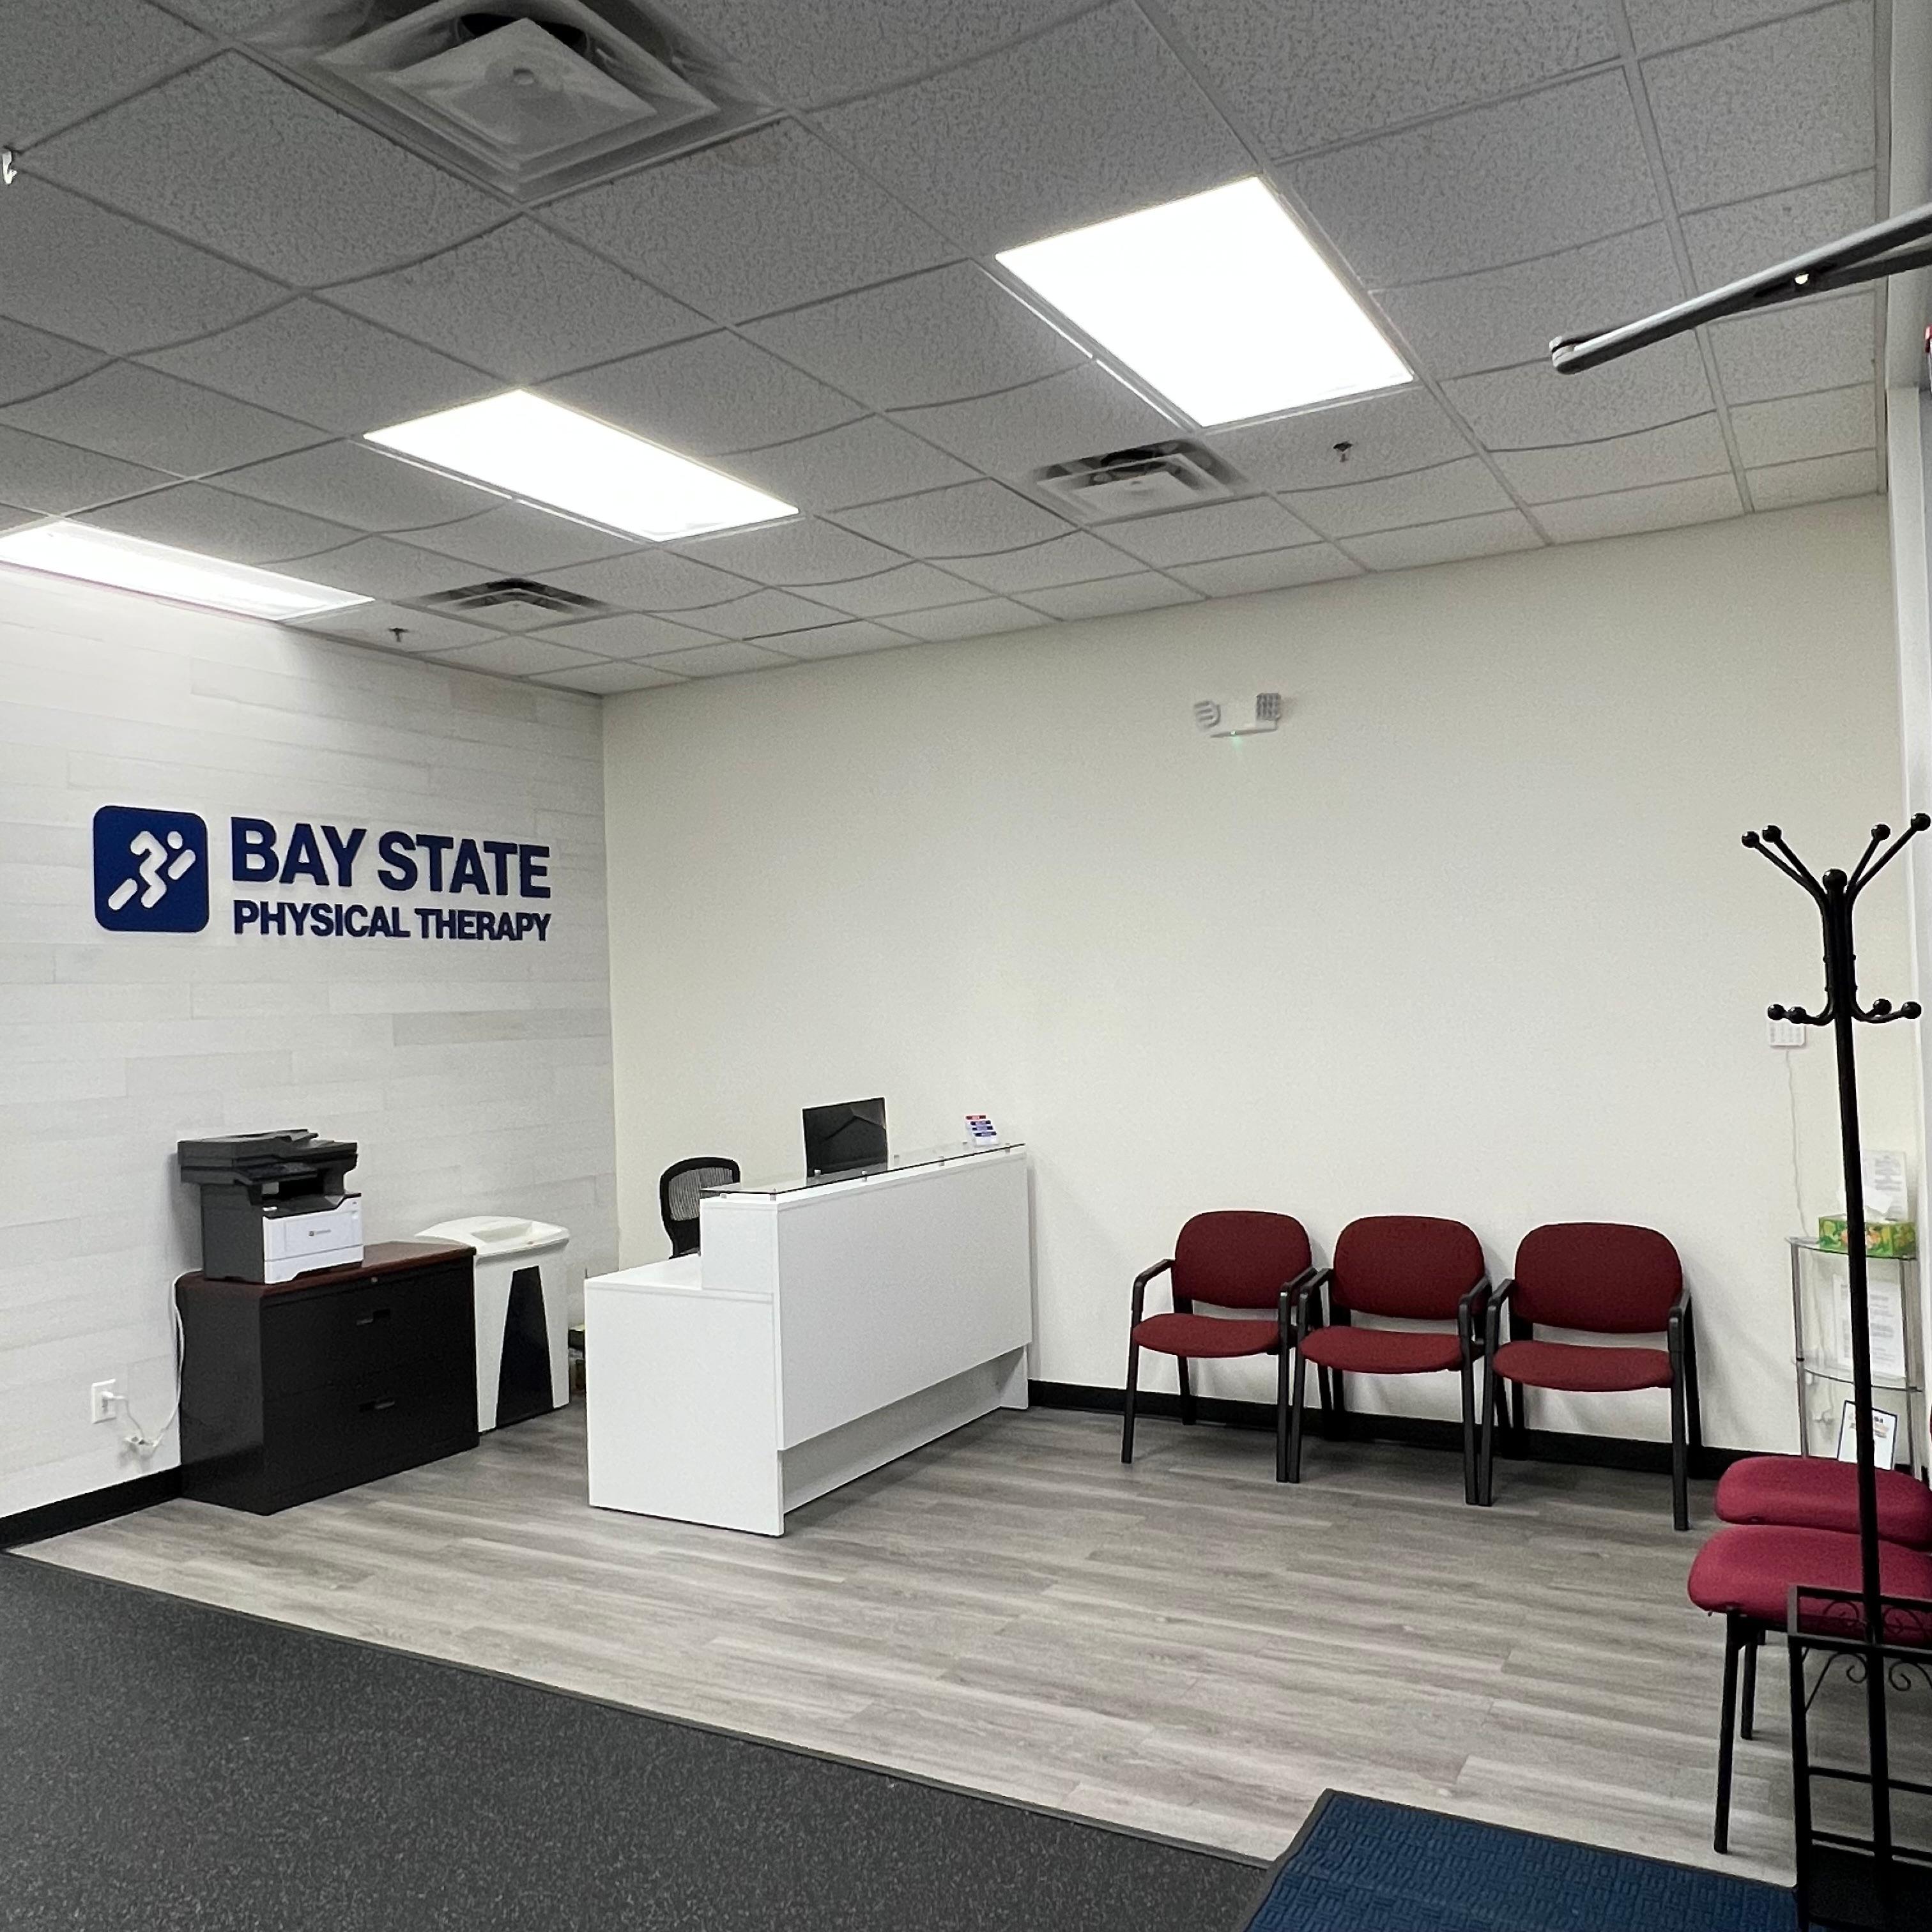 Bay State Physical Therapy Malden (781)605-1225